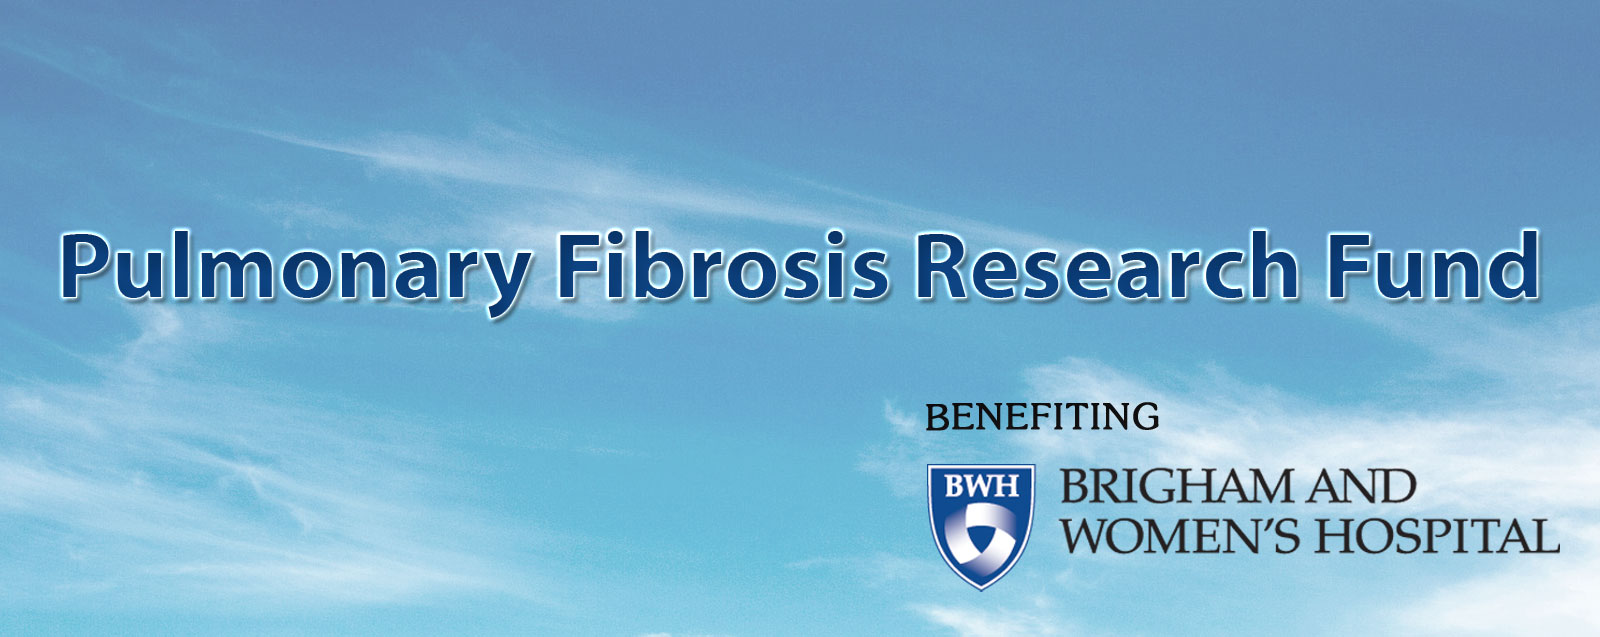 The Pulmonary Fibrosis Research Fund